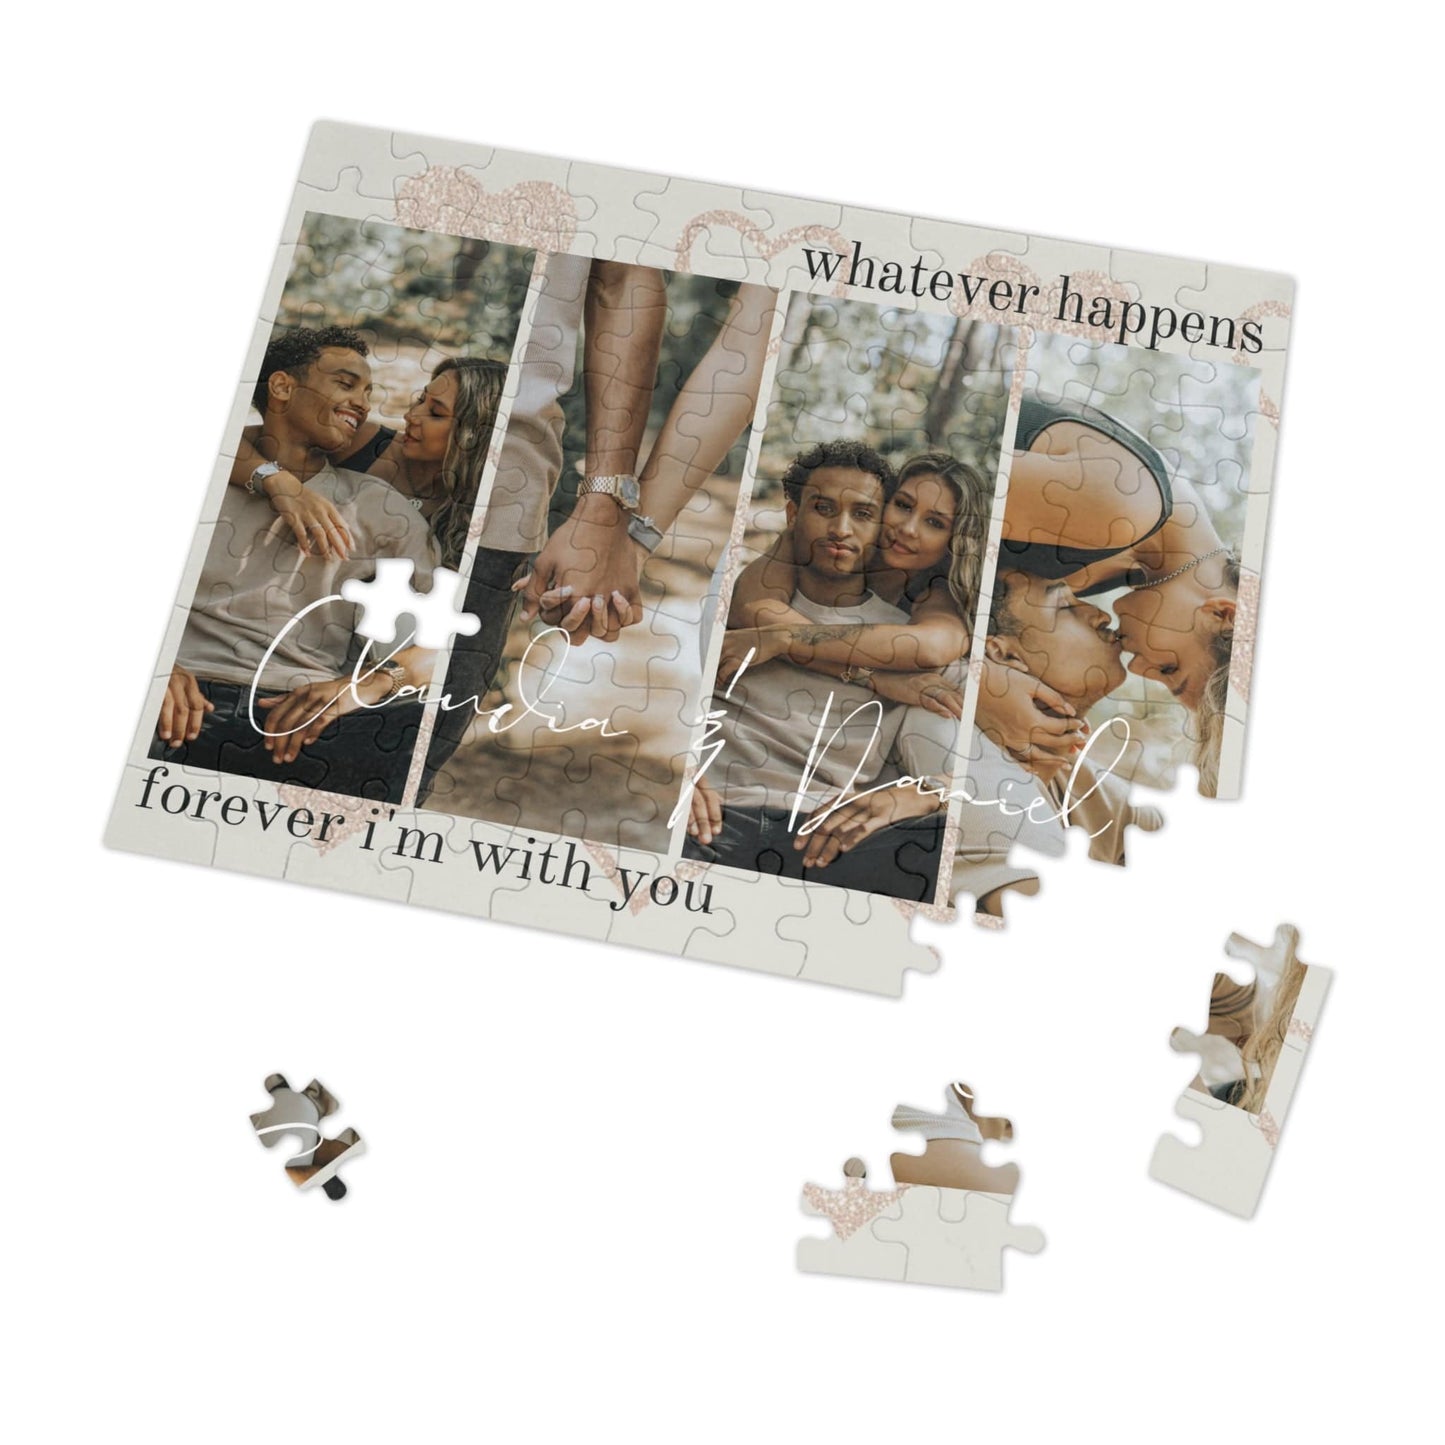 Personalized Jigsaw Puzzles for Adults from Photo - 1000/500/252/110 Pieces - Romantic DIY Valentine's Gifts for Boyfriend